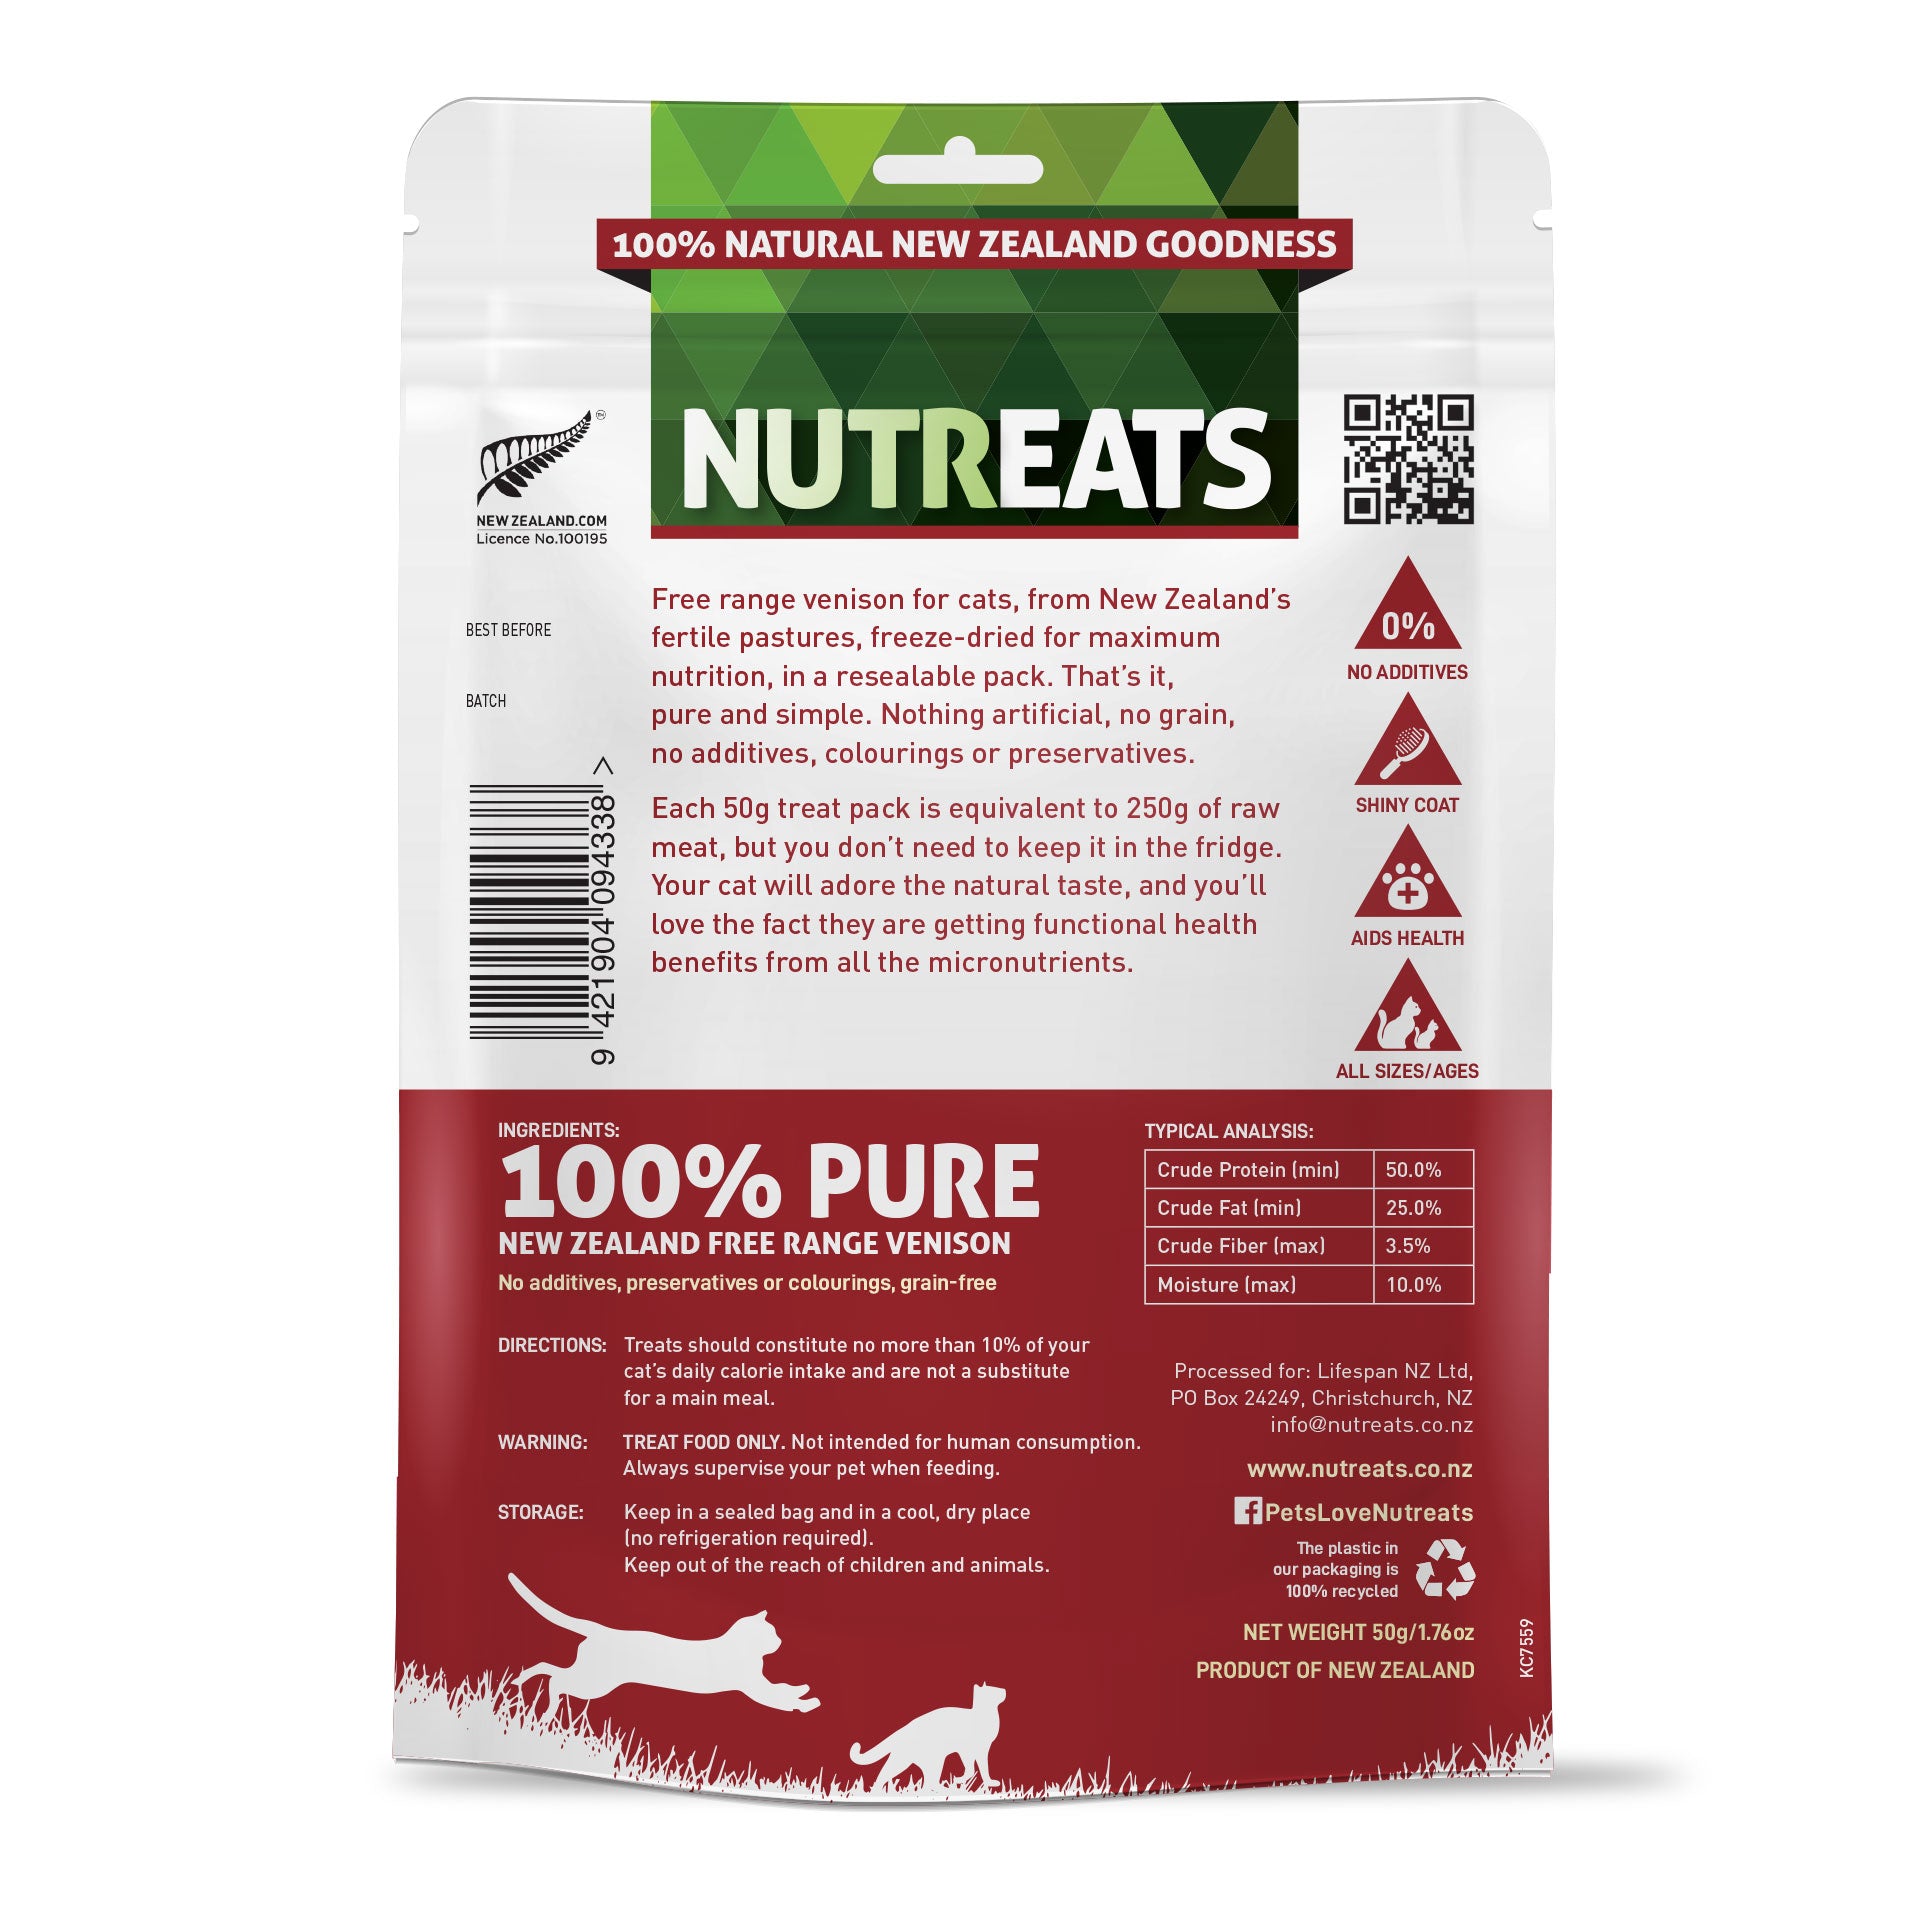 Nutreats free range venison treats for cats. Rich in iron and 100% natural. Supporting your cat's health with tasty treats. Natural taste and good for teeth and general health and mobility.